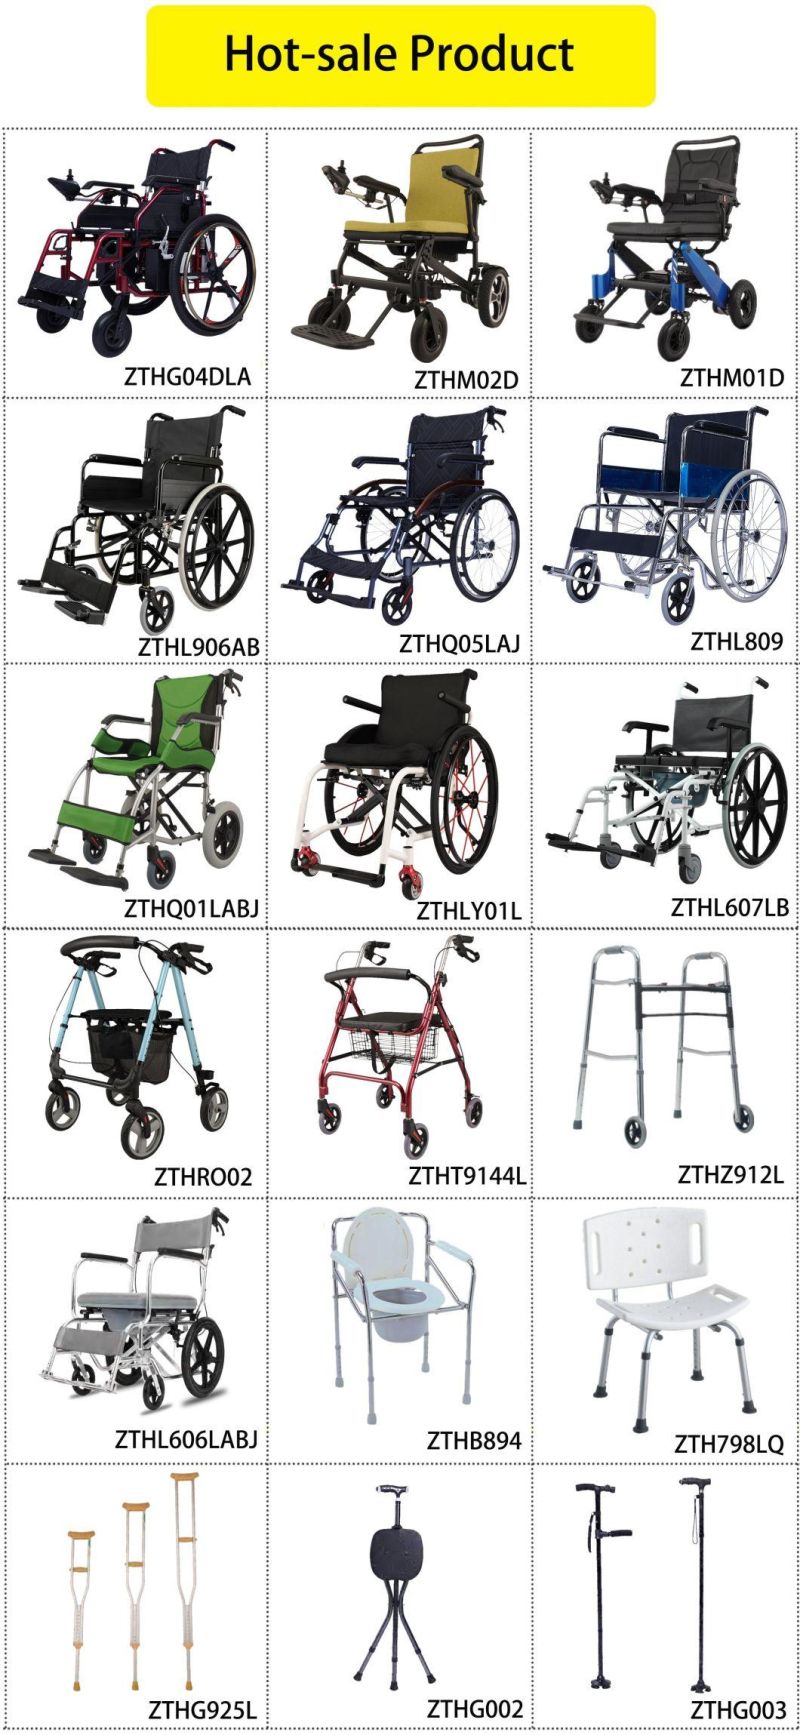 Home Care Rehabilitation Products Lightweight Folded Transfer Shower Safety Antiskid Bath Chair in Bathroom for Elderly People